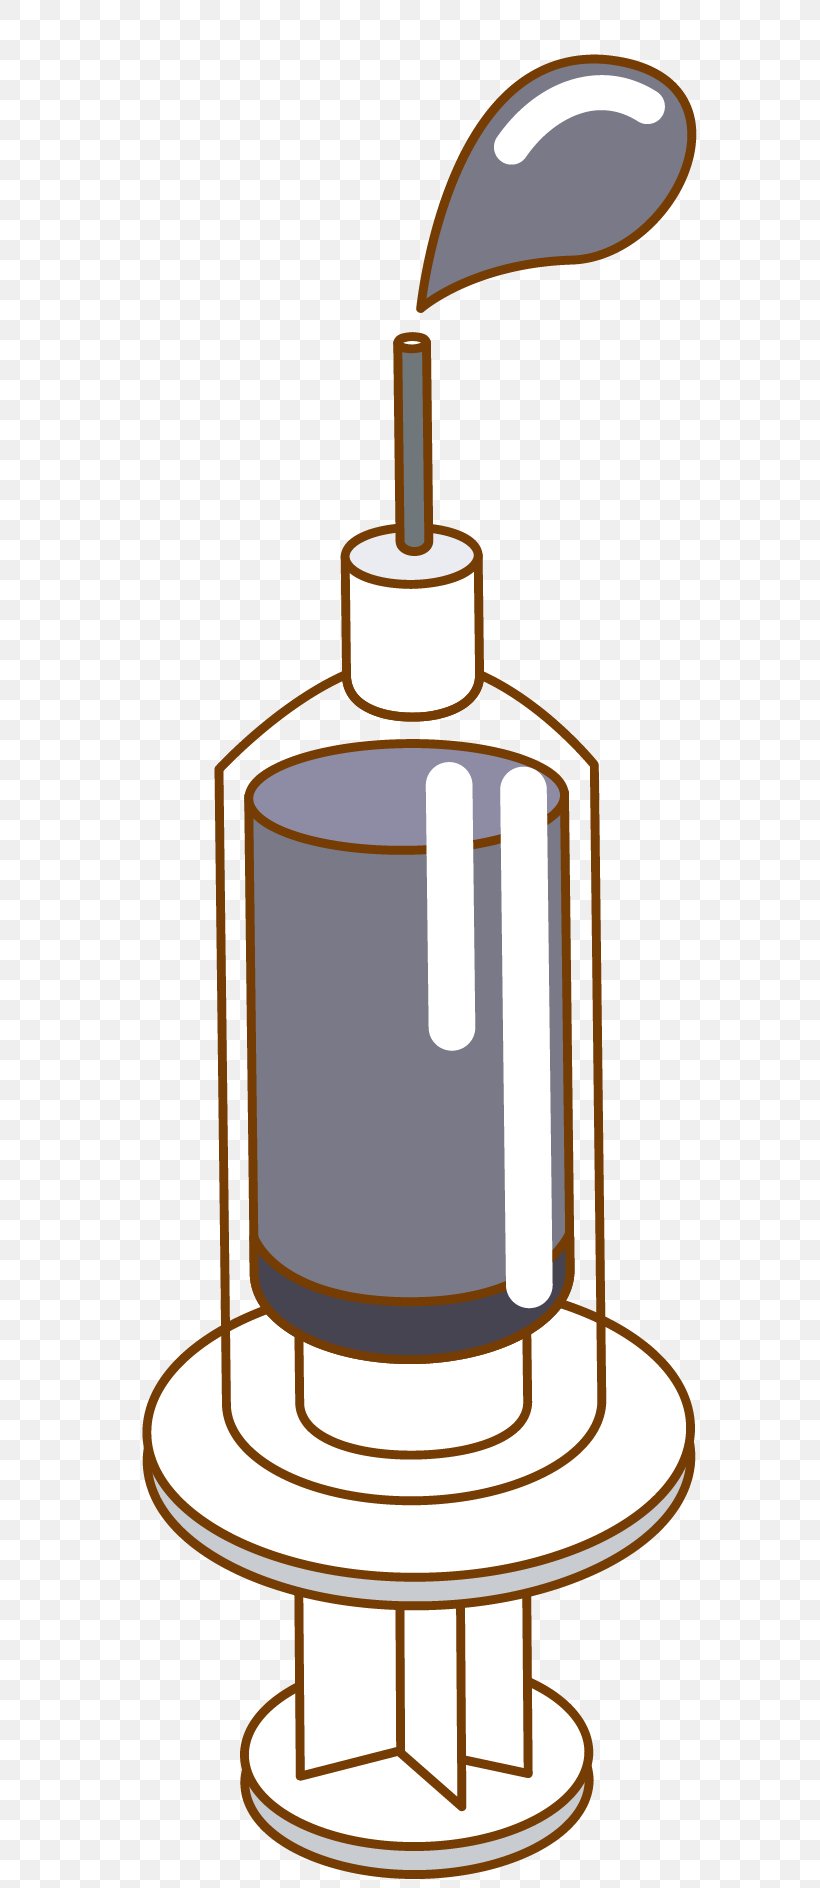 Syringe Cartoon Clip Art, PNG, 608x1888px, Syringe, Cartoon, Drawing, Hypodermic Needle, Injection Download Free